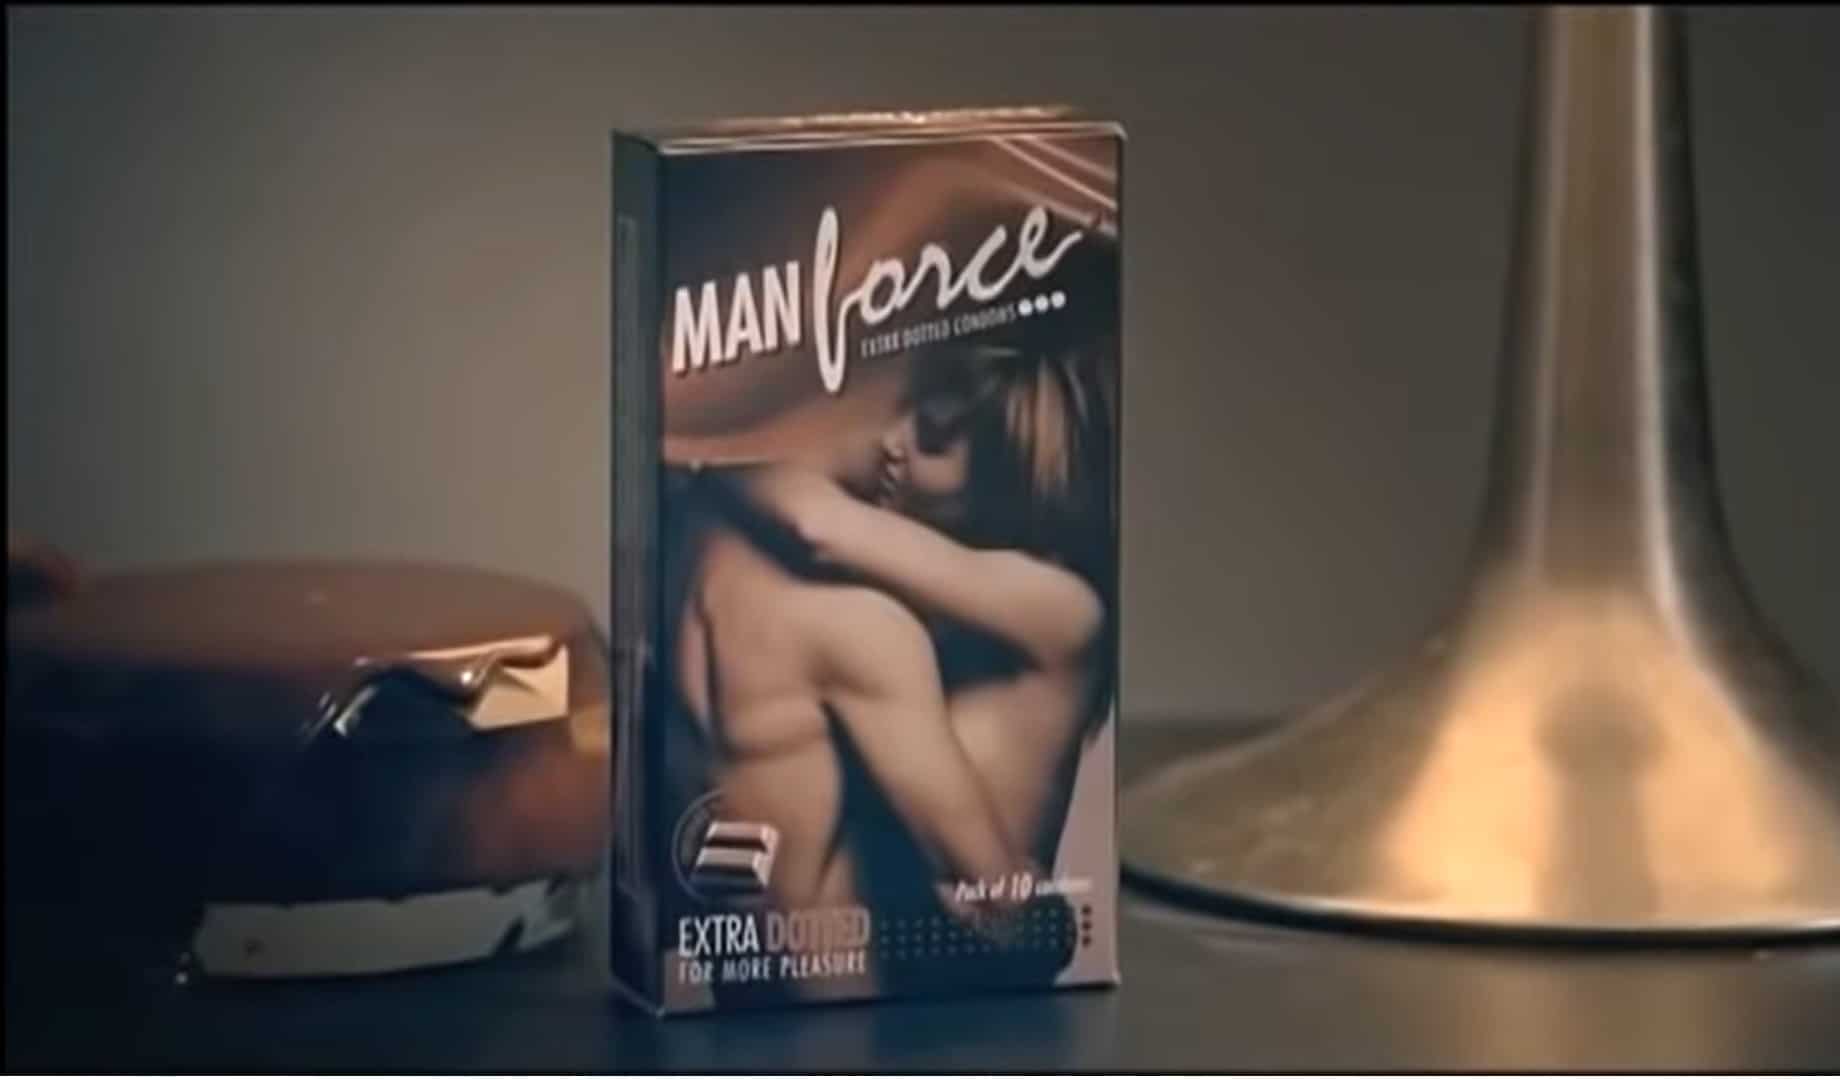 Man Forced Condom Xxx - Mankind Pharma IPO listing: Manforce condom maker off listing high, but  remains well among India's top 100 most valuable firms | Where Manforce  condom Prega News pregnancy test kit maker Mankind Pharma